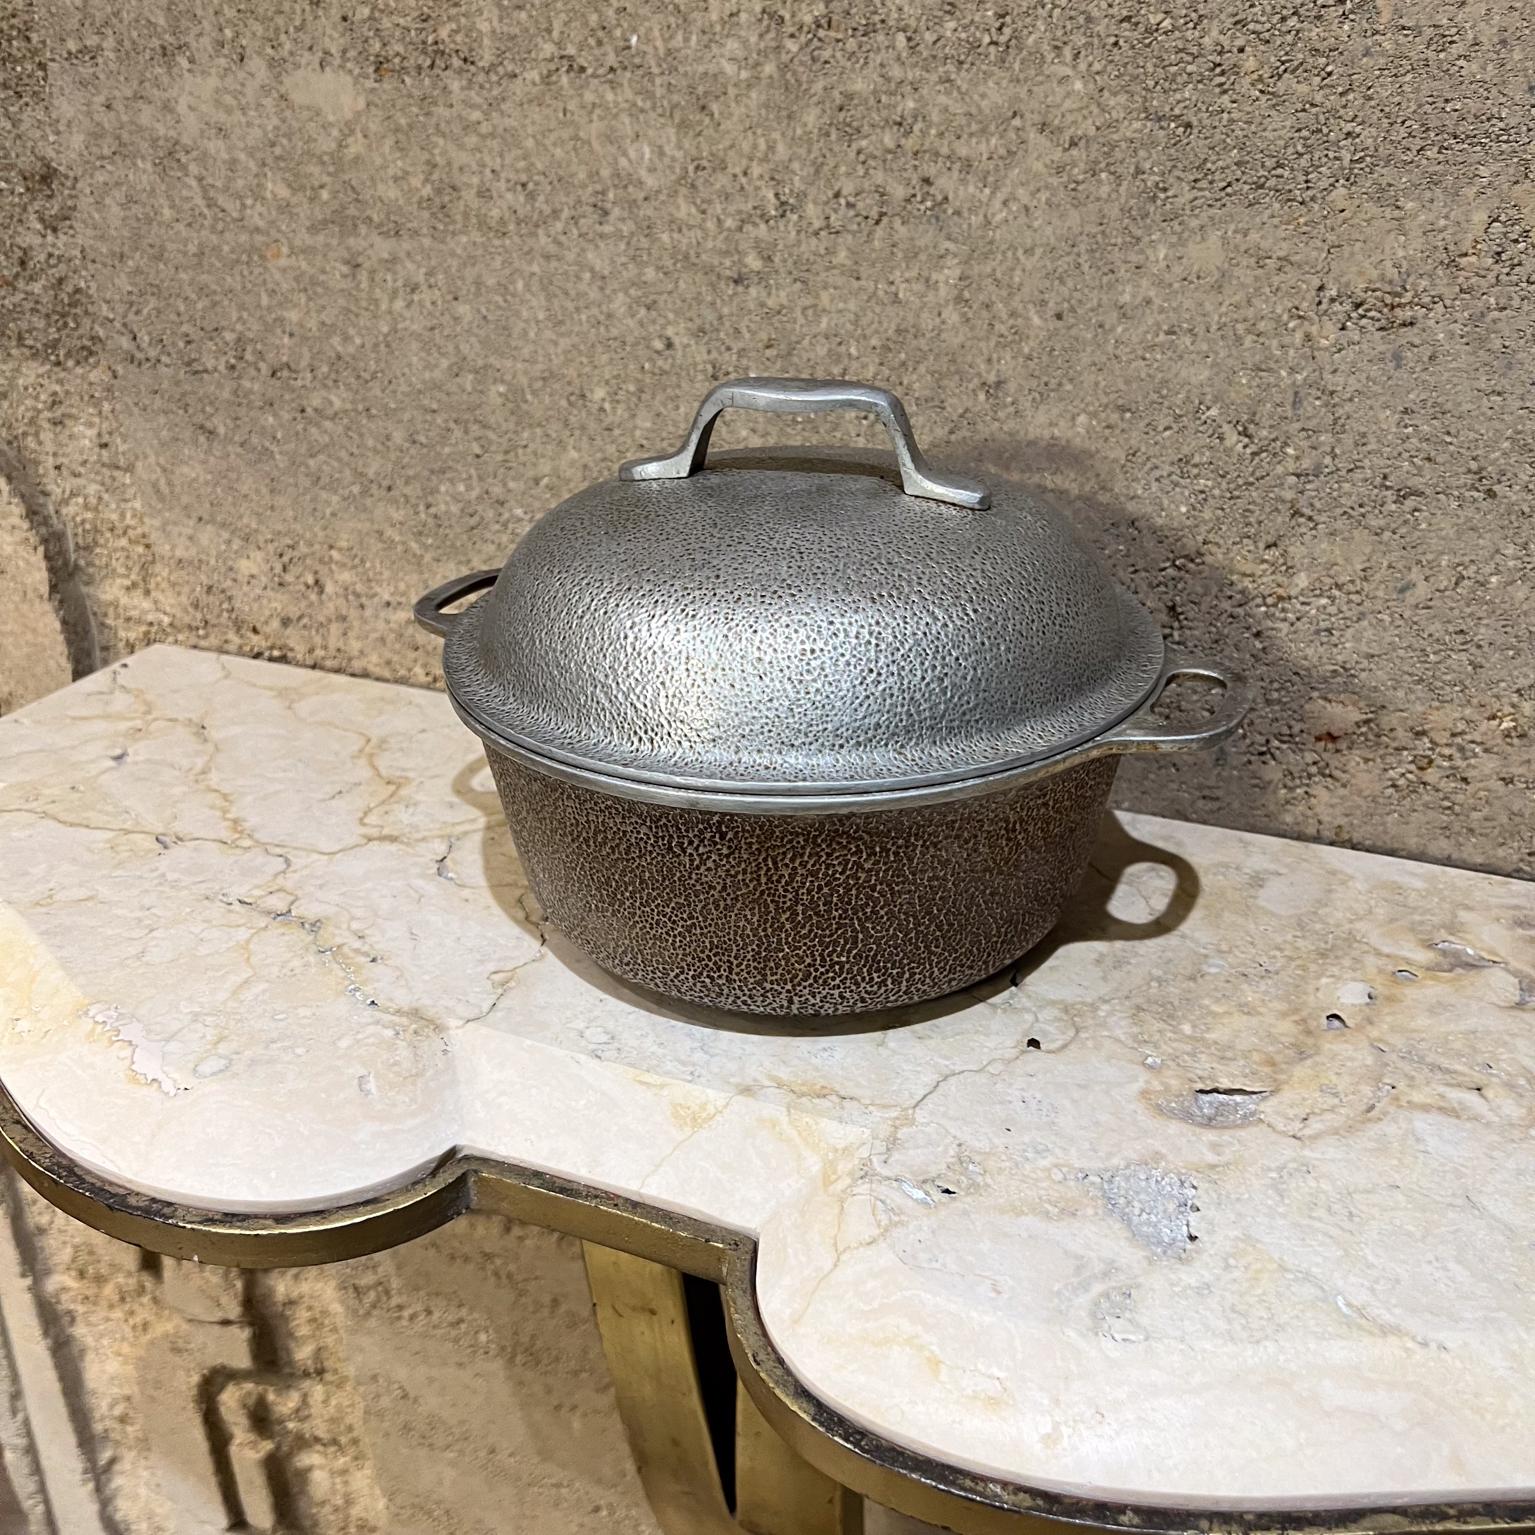 1950s Century Silver Seal Hammered Aluminum Dutch Oven Roaster 
6.5 h x 10 w x 8 diameter
Preowned original vintage
Refer to images provided